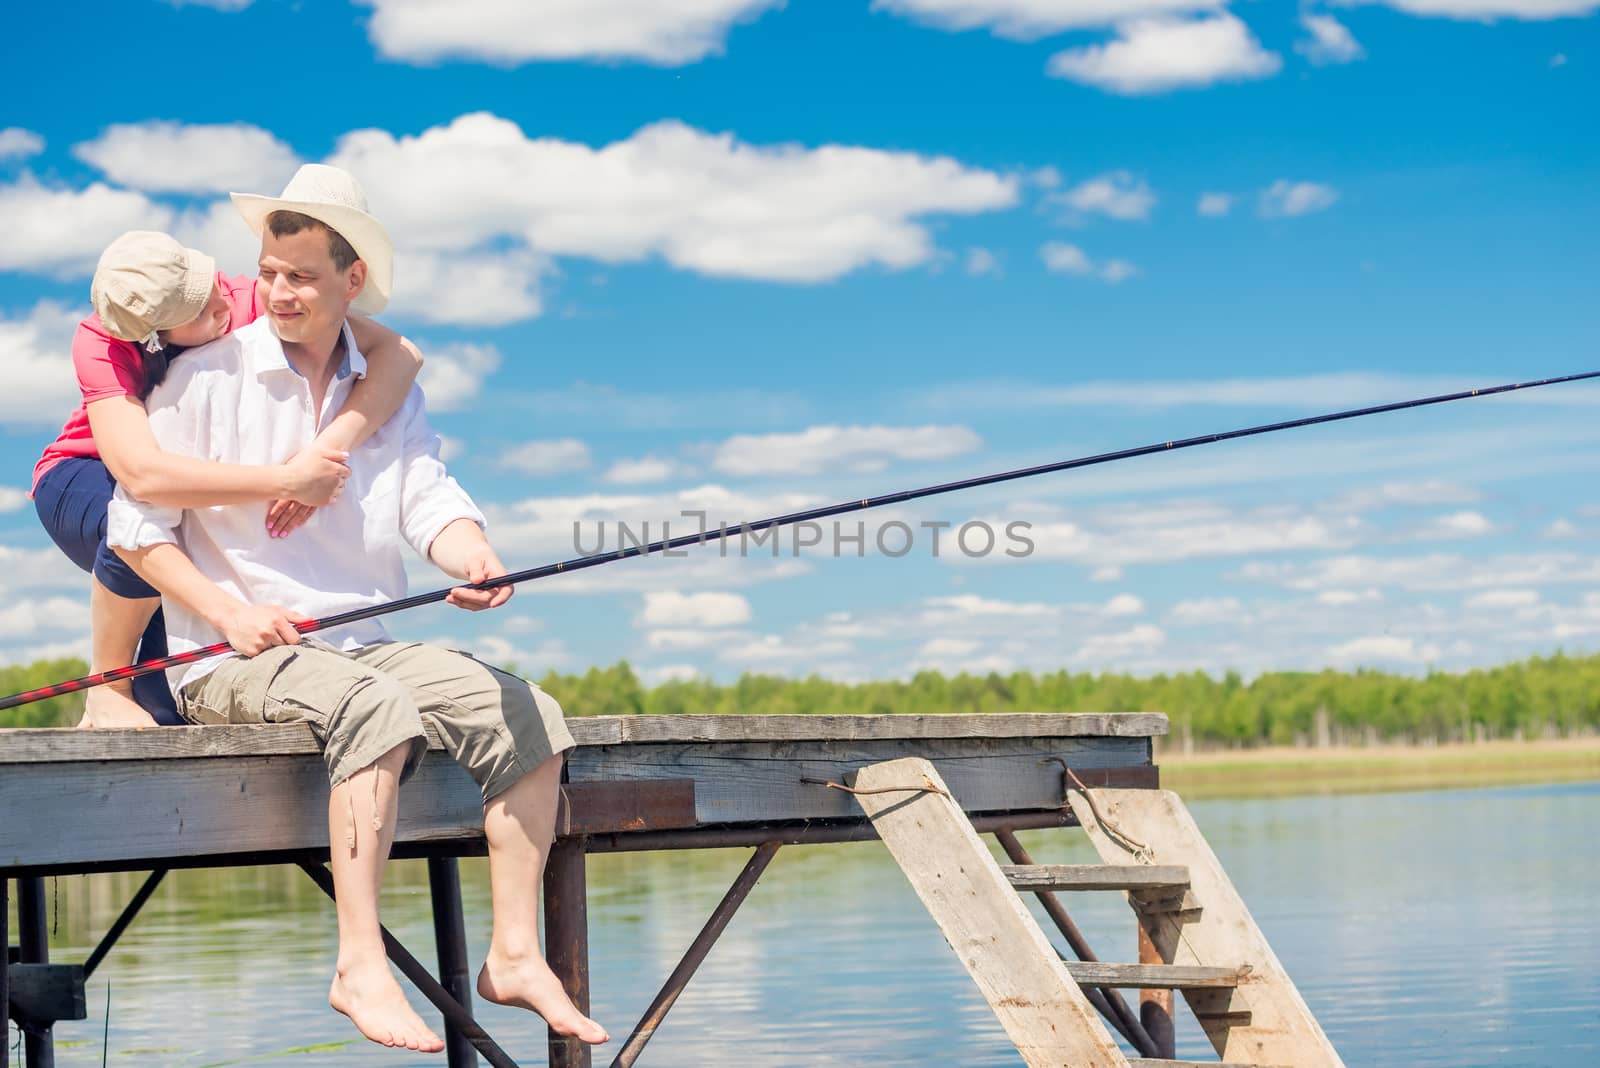 fisherman and his wife on a wooden pier near the lake, a man is fishing